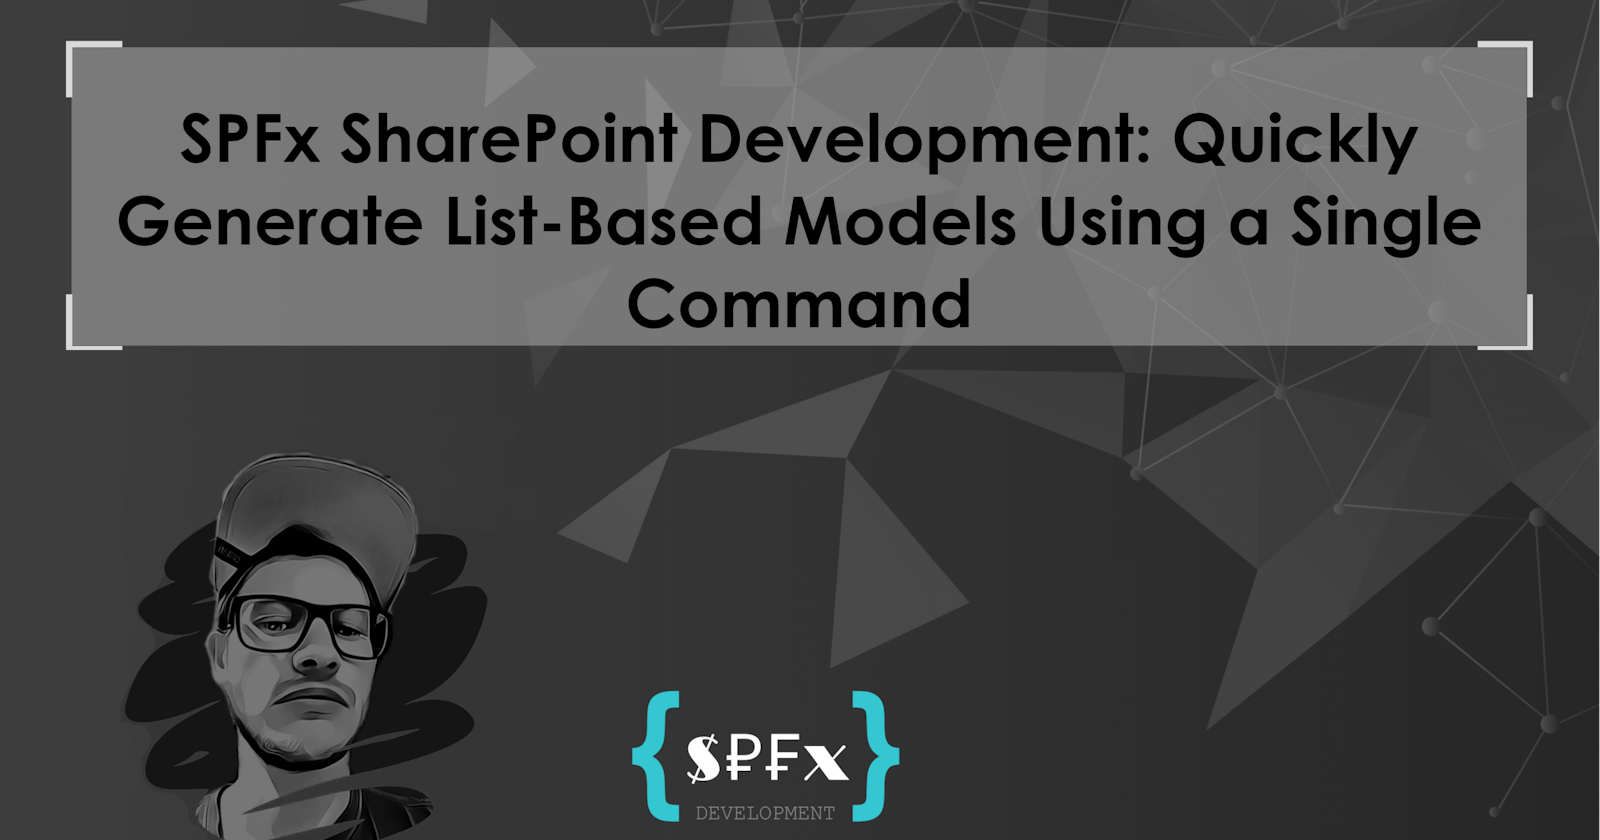 SPFx SharePoint Development: Quickly Generate List-Based Models Using a Single Command